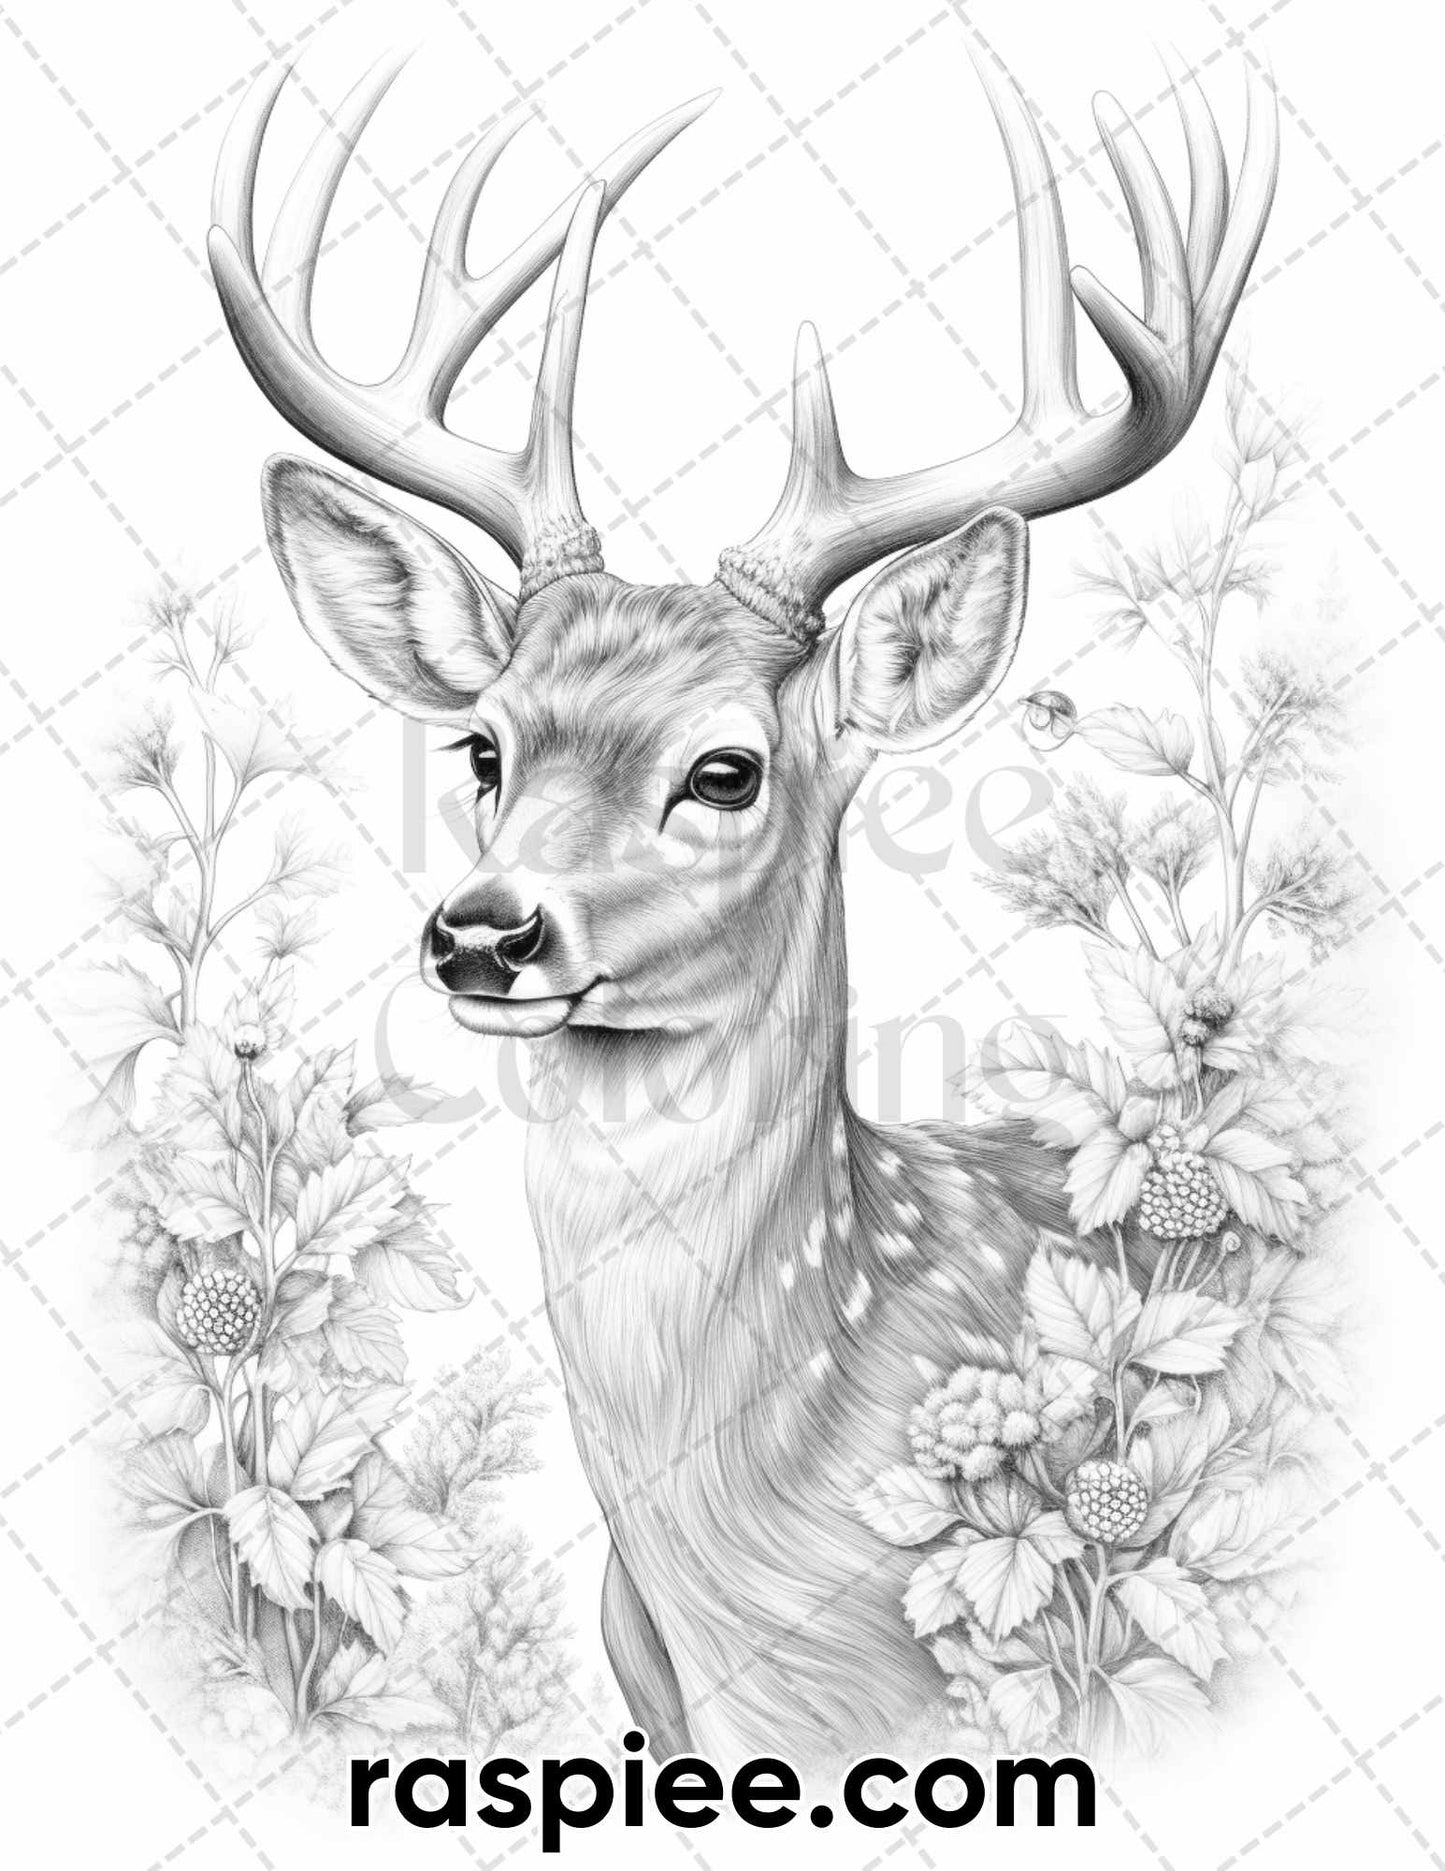 Christmas Deer Coloring Pages, Stress Relief Coloring Book, Christmas Coloring Pages for Adults, Christmas Coloring Sheets, Xmas Coloring Pages, Holiday Coloring pages, Winter Coloring Pages, Animal Coloring Pages for Adults, Christmas Coloring Book Printable